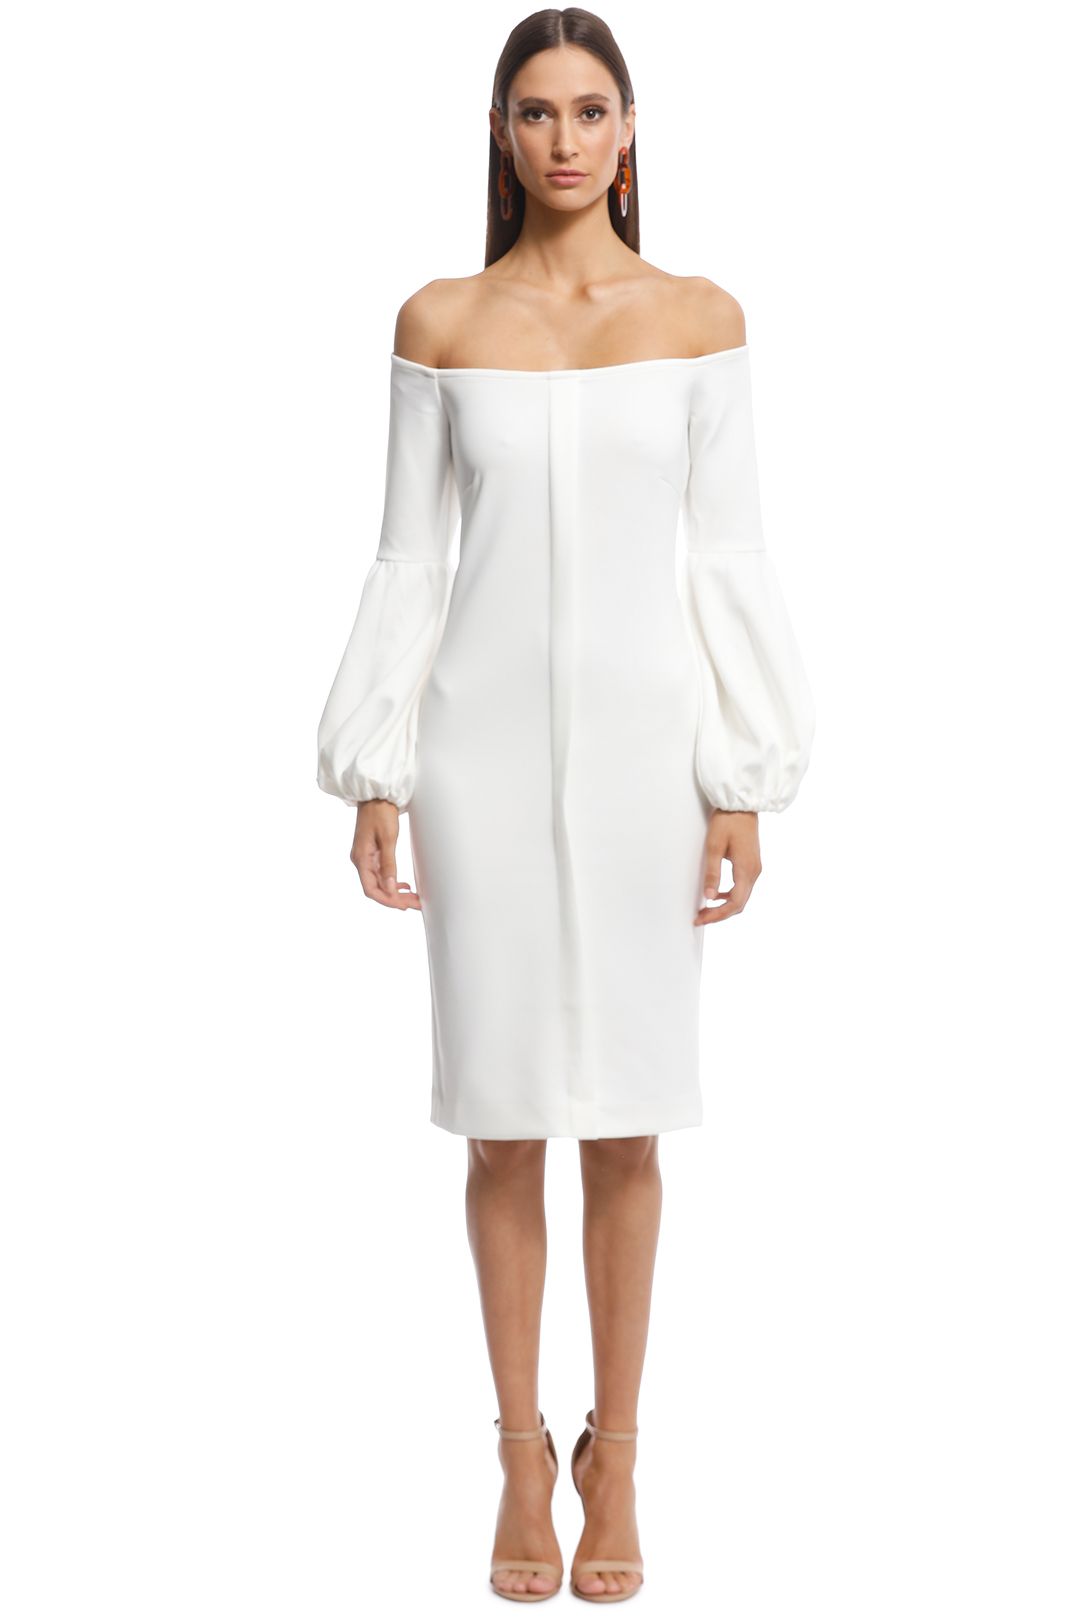 Maurie and Eve - Serres Dress - White - Front